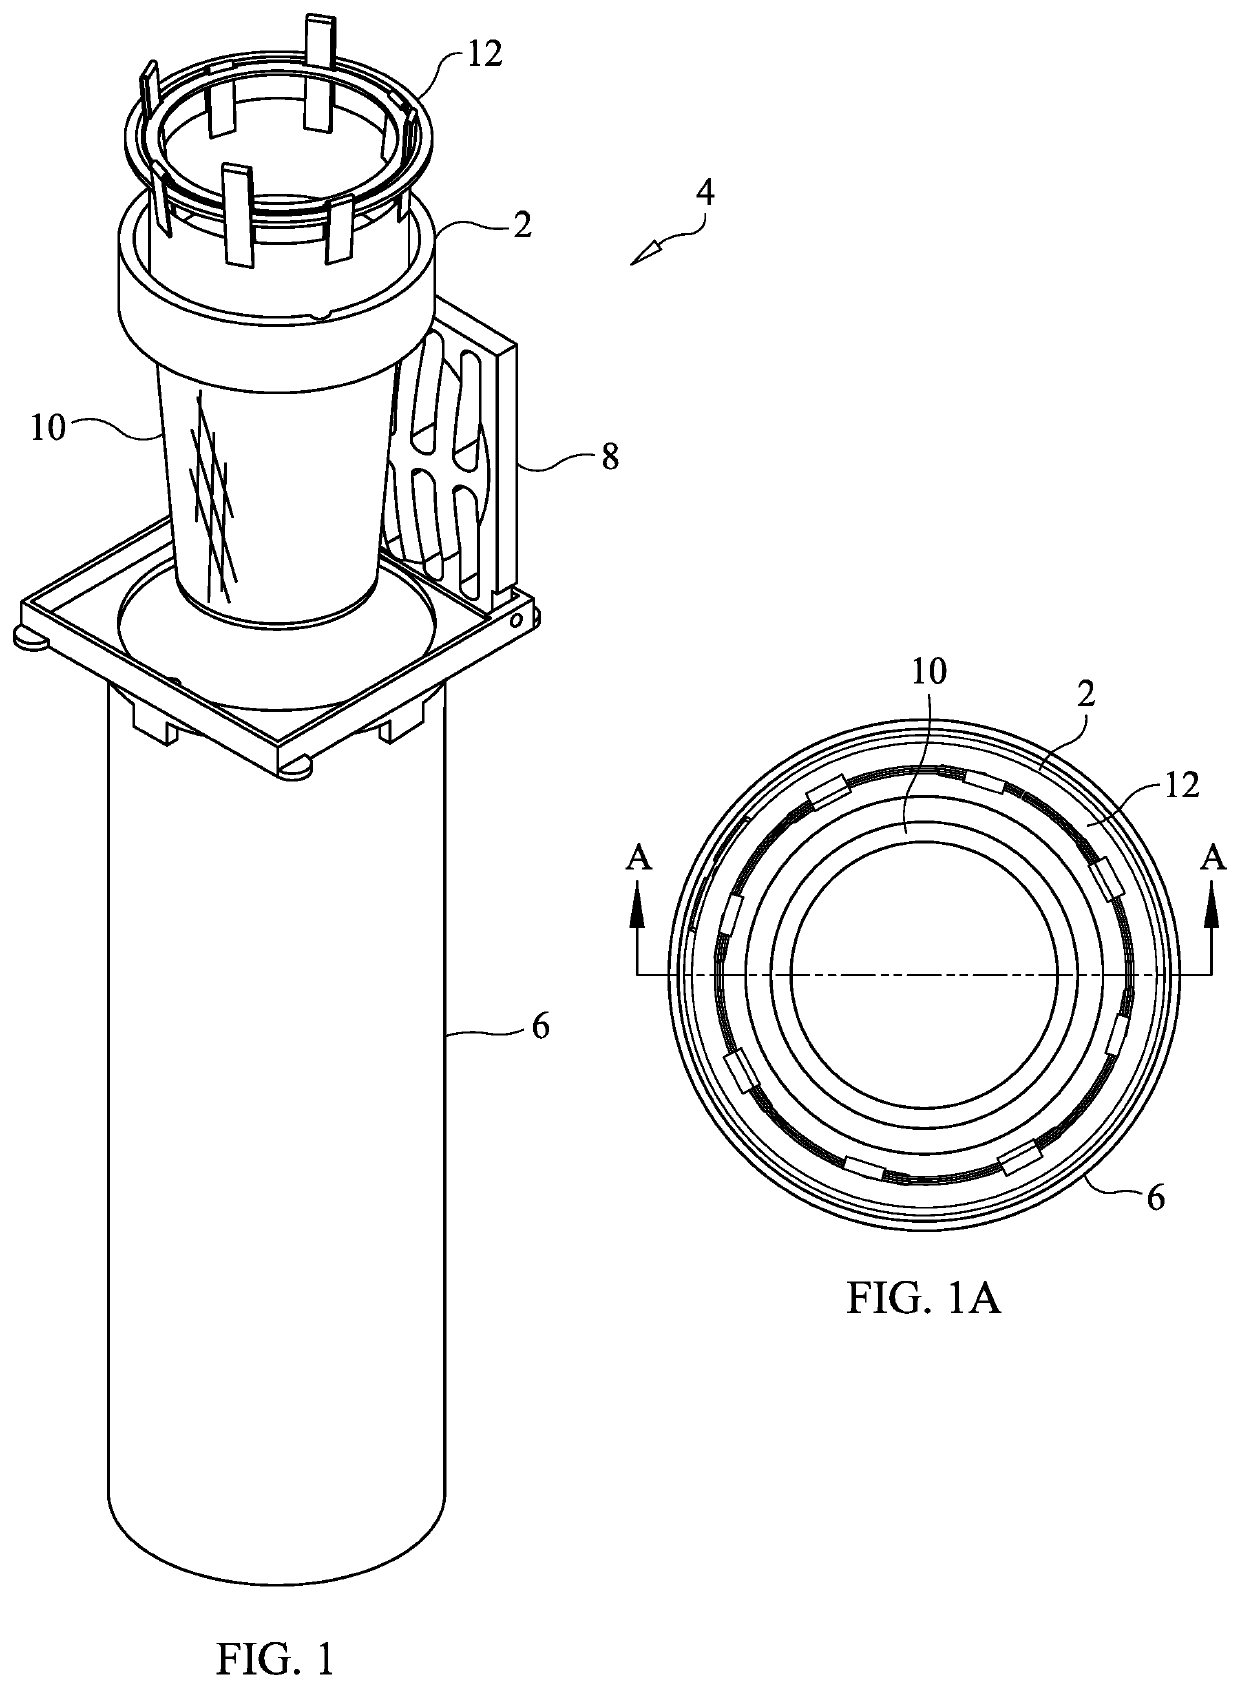 Expansion ring mountable in a storm drain for supporting a filtering apparatus